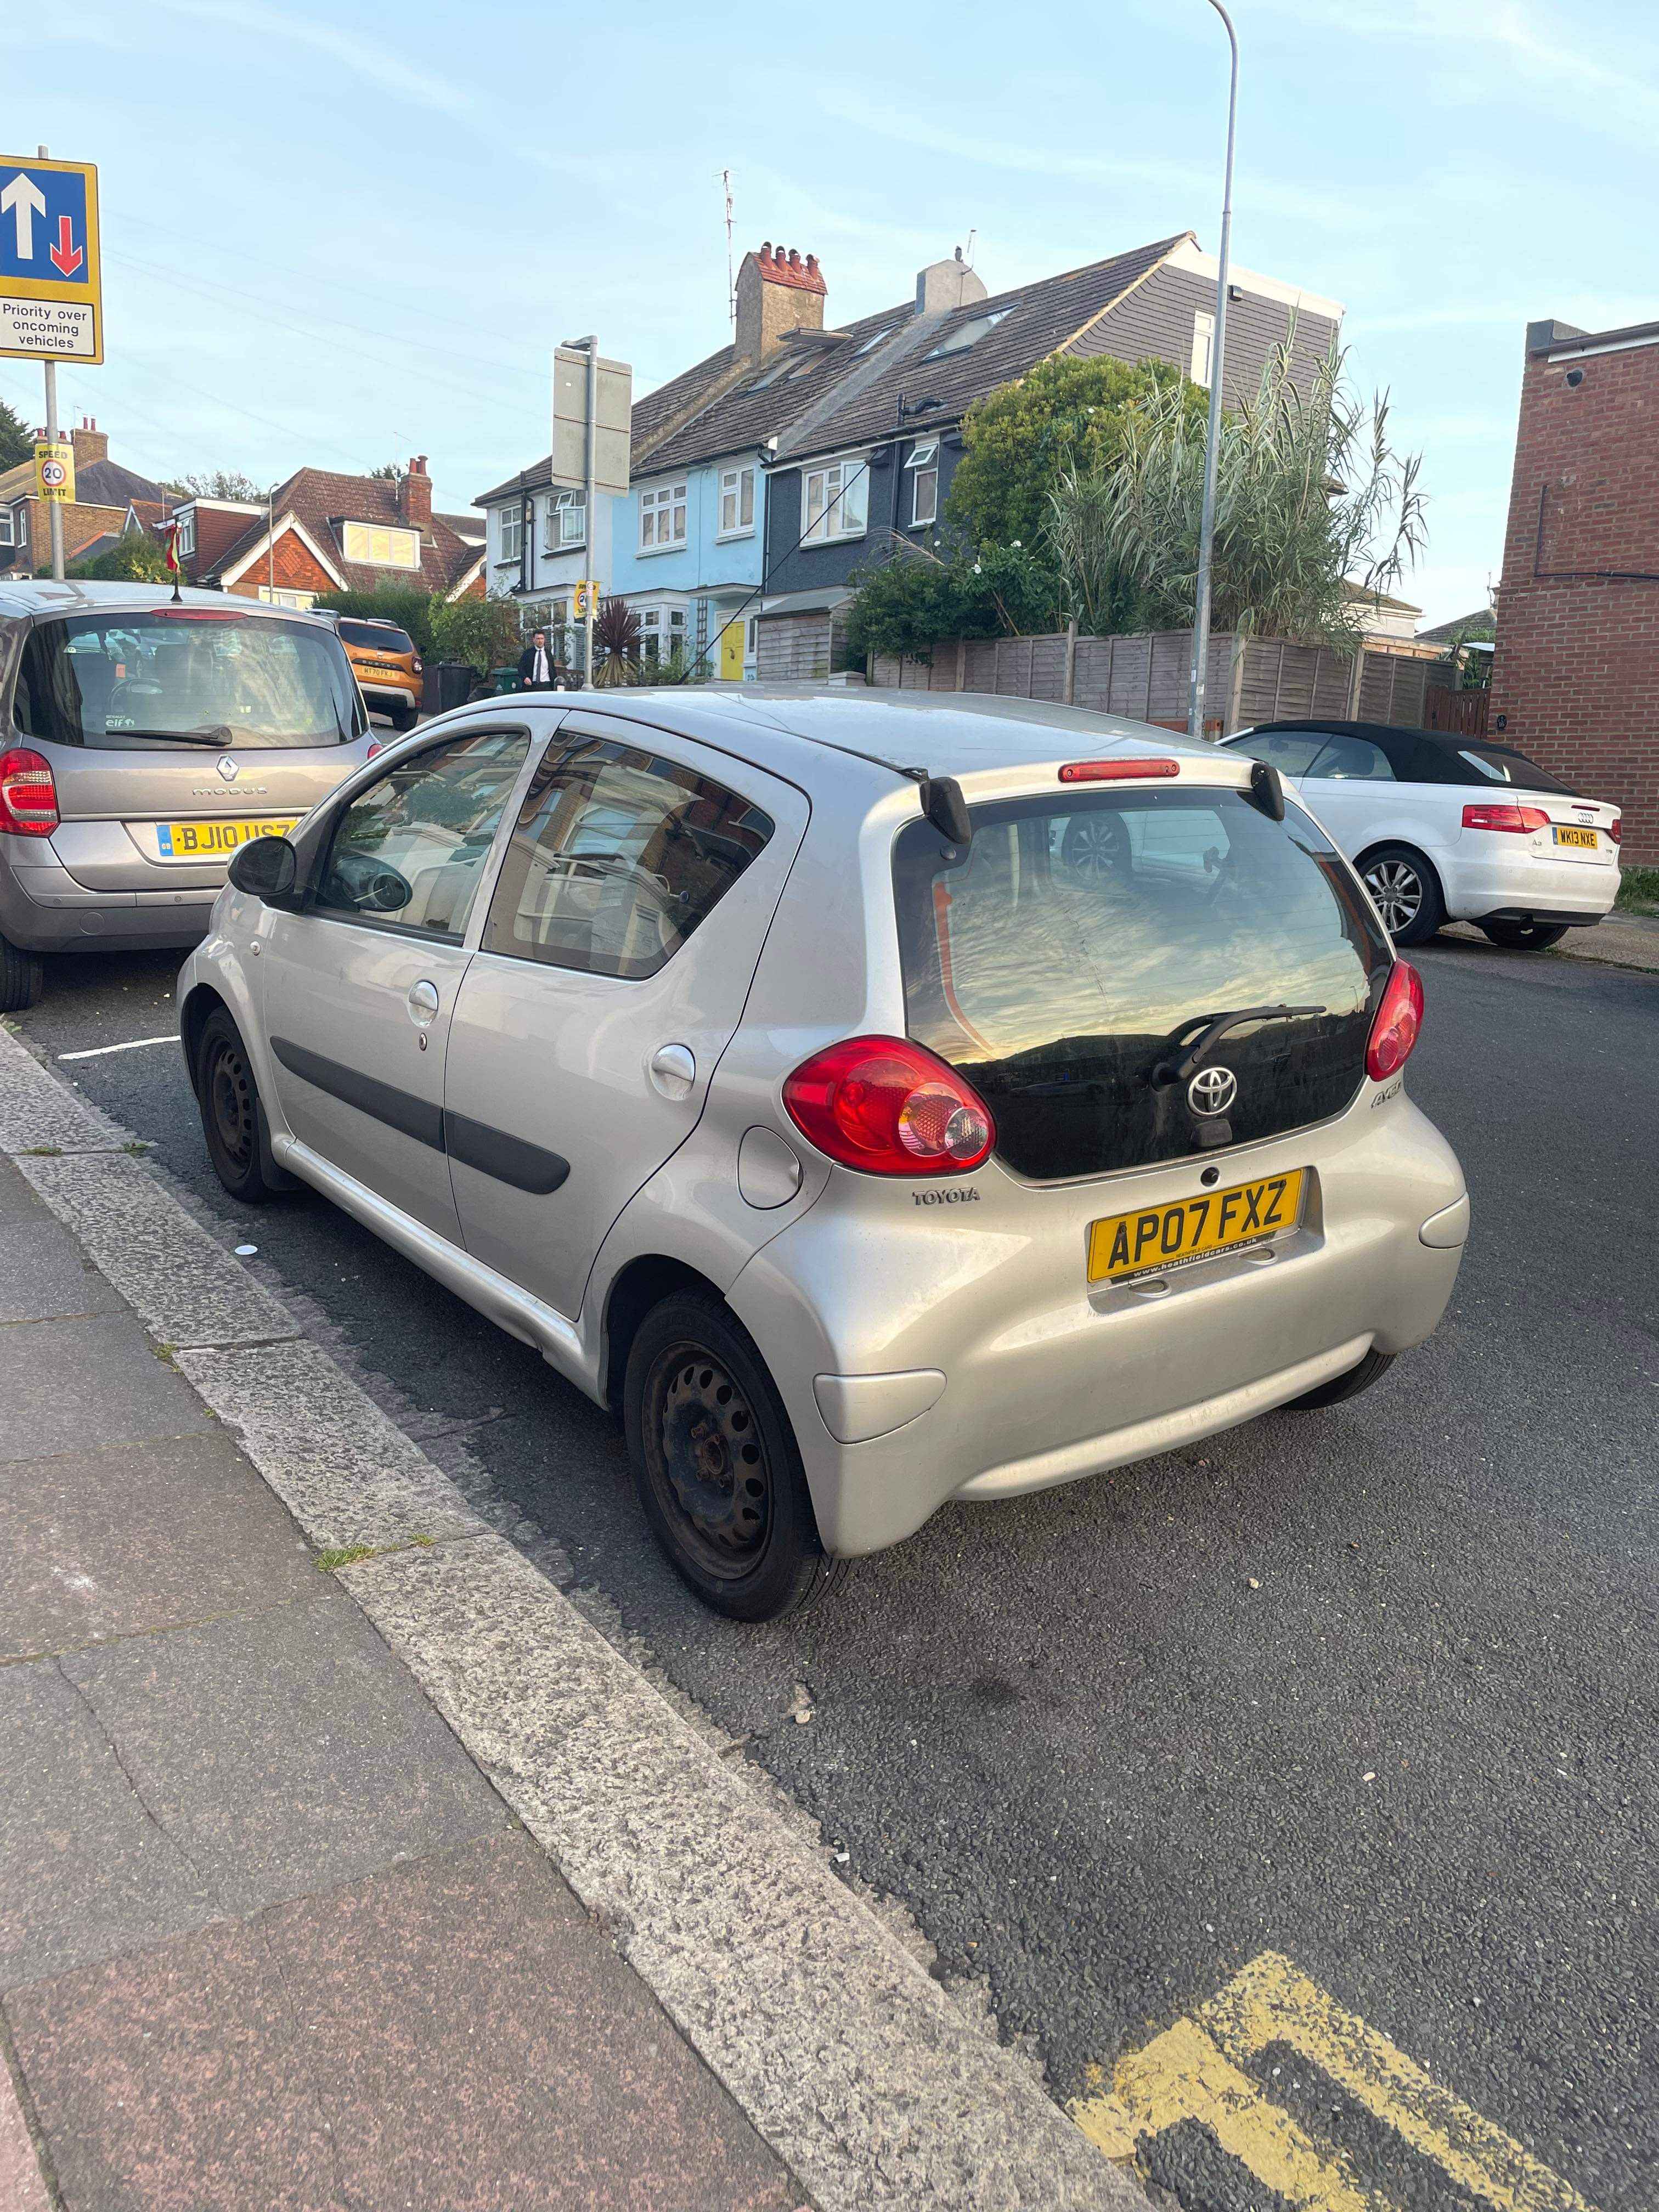 Photograph of AP07 FXZ - a Silver Toyota Aygo parked in Hollingdean by a non-resident, and potentially abandoned. The third of three photographs supplied by the residents of Hollingdean.